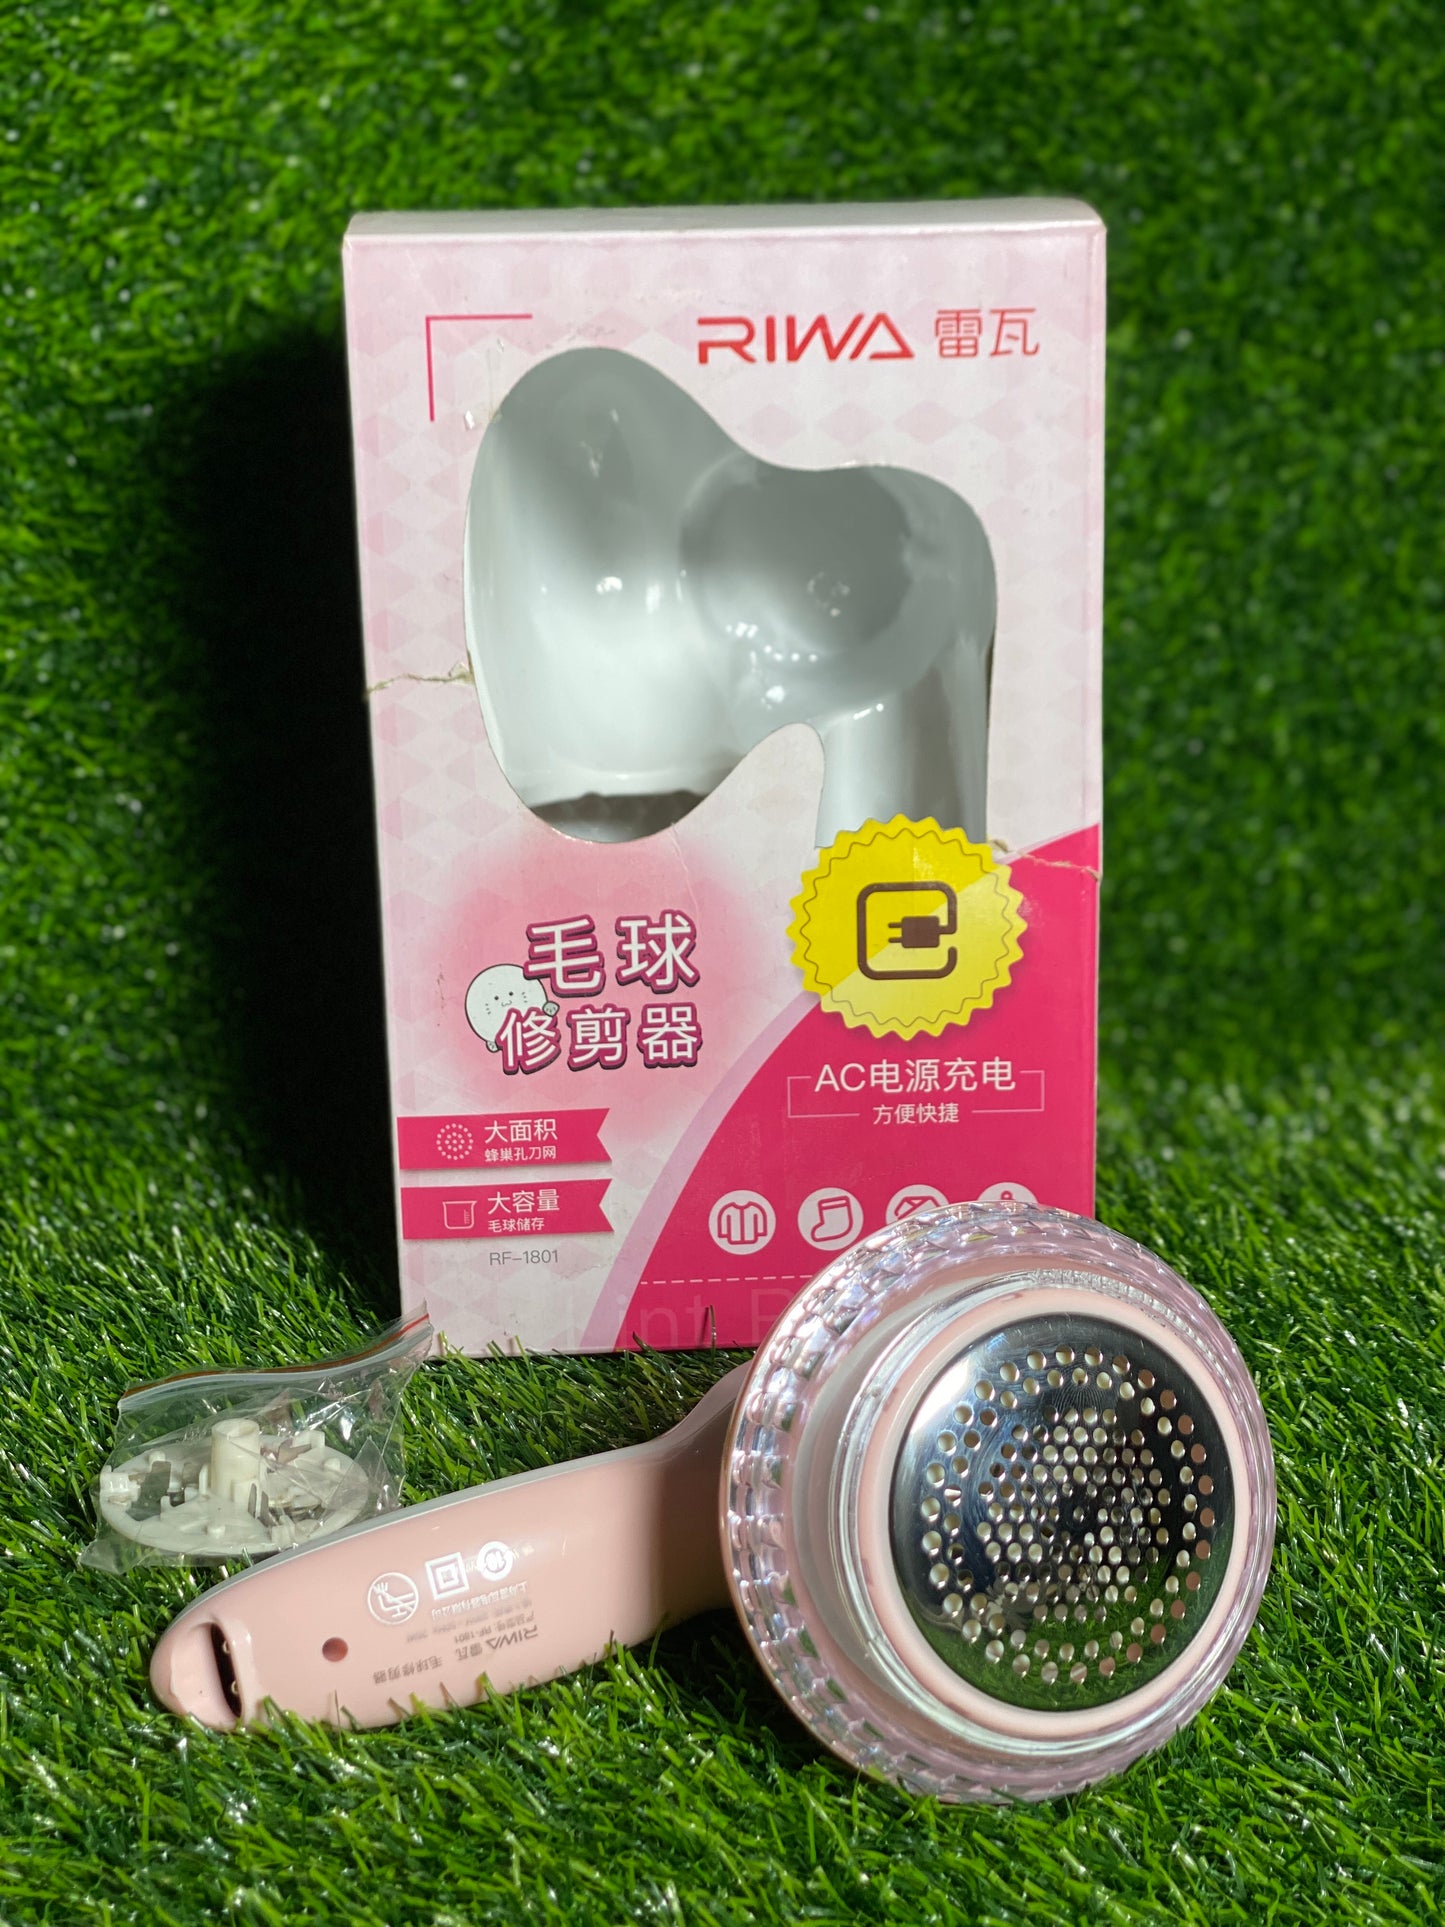 RIWA Pellets Machine For Lint Clothes Wool Cleaning Brush Electric Lint Remover Fluff Pills Shaver Trimmer Cloth RF-1801